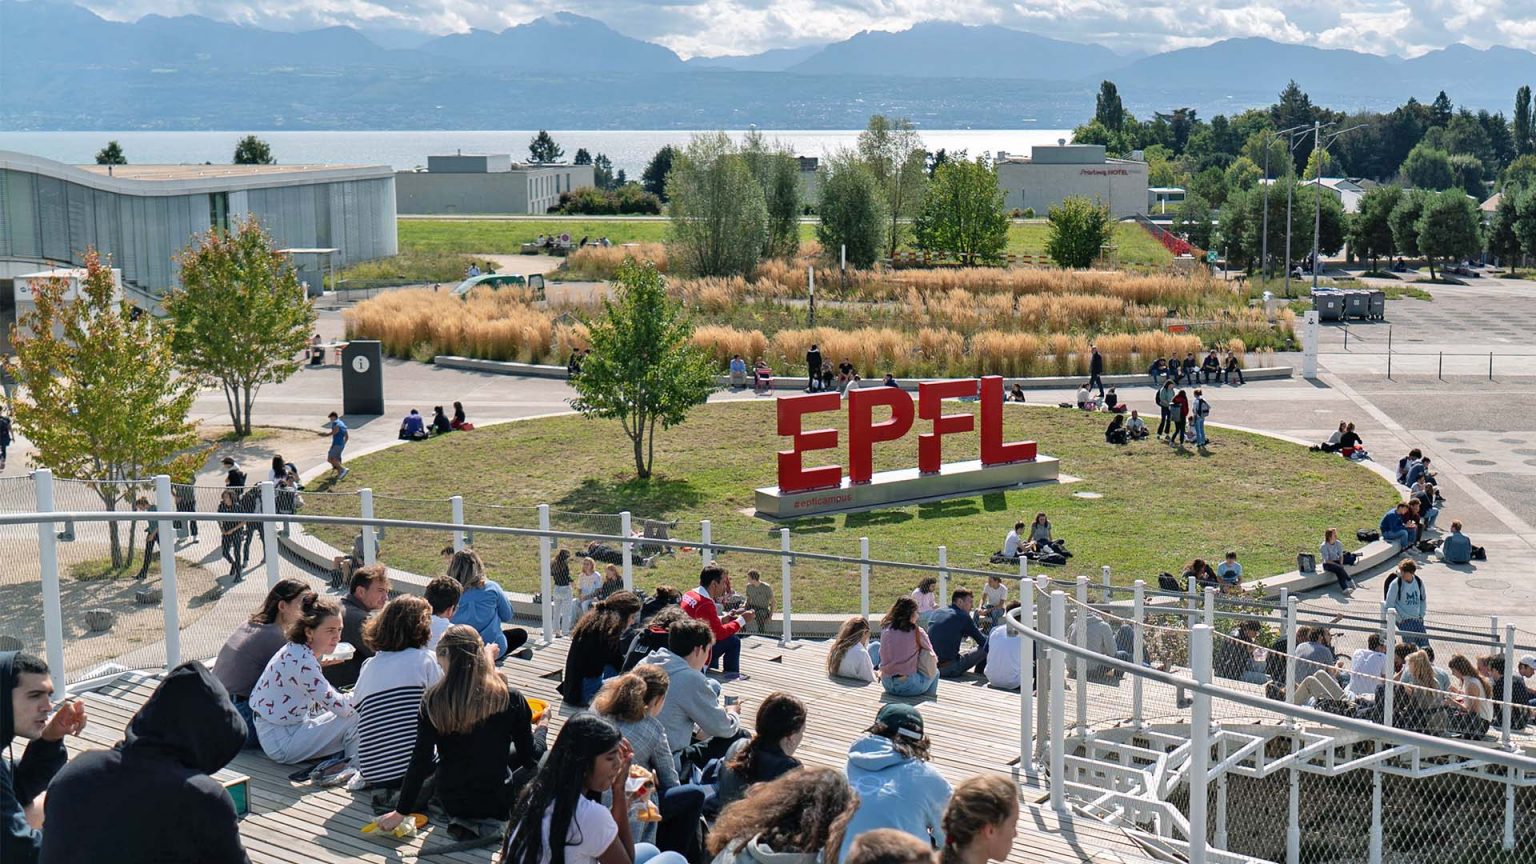 EPFL Campus with students